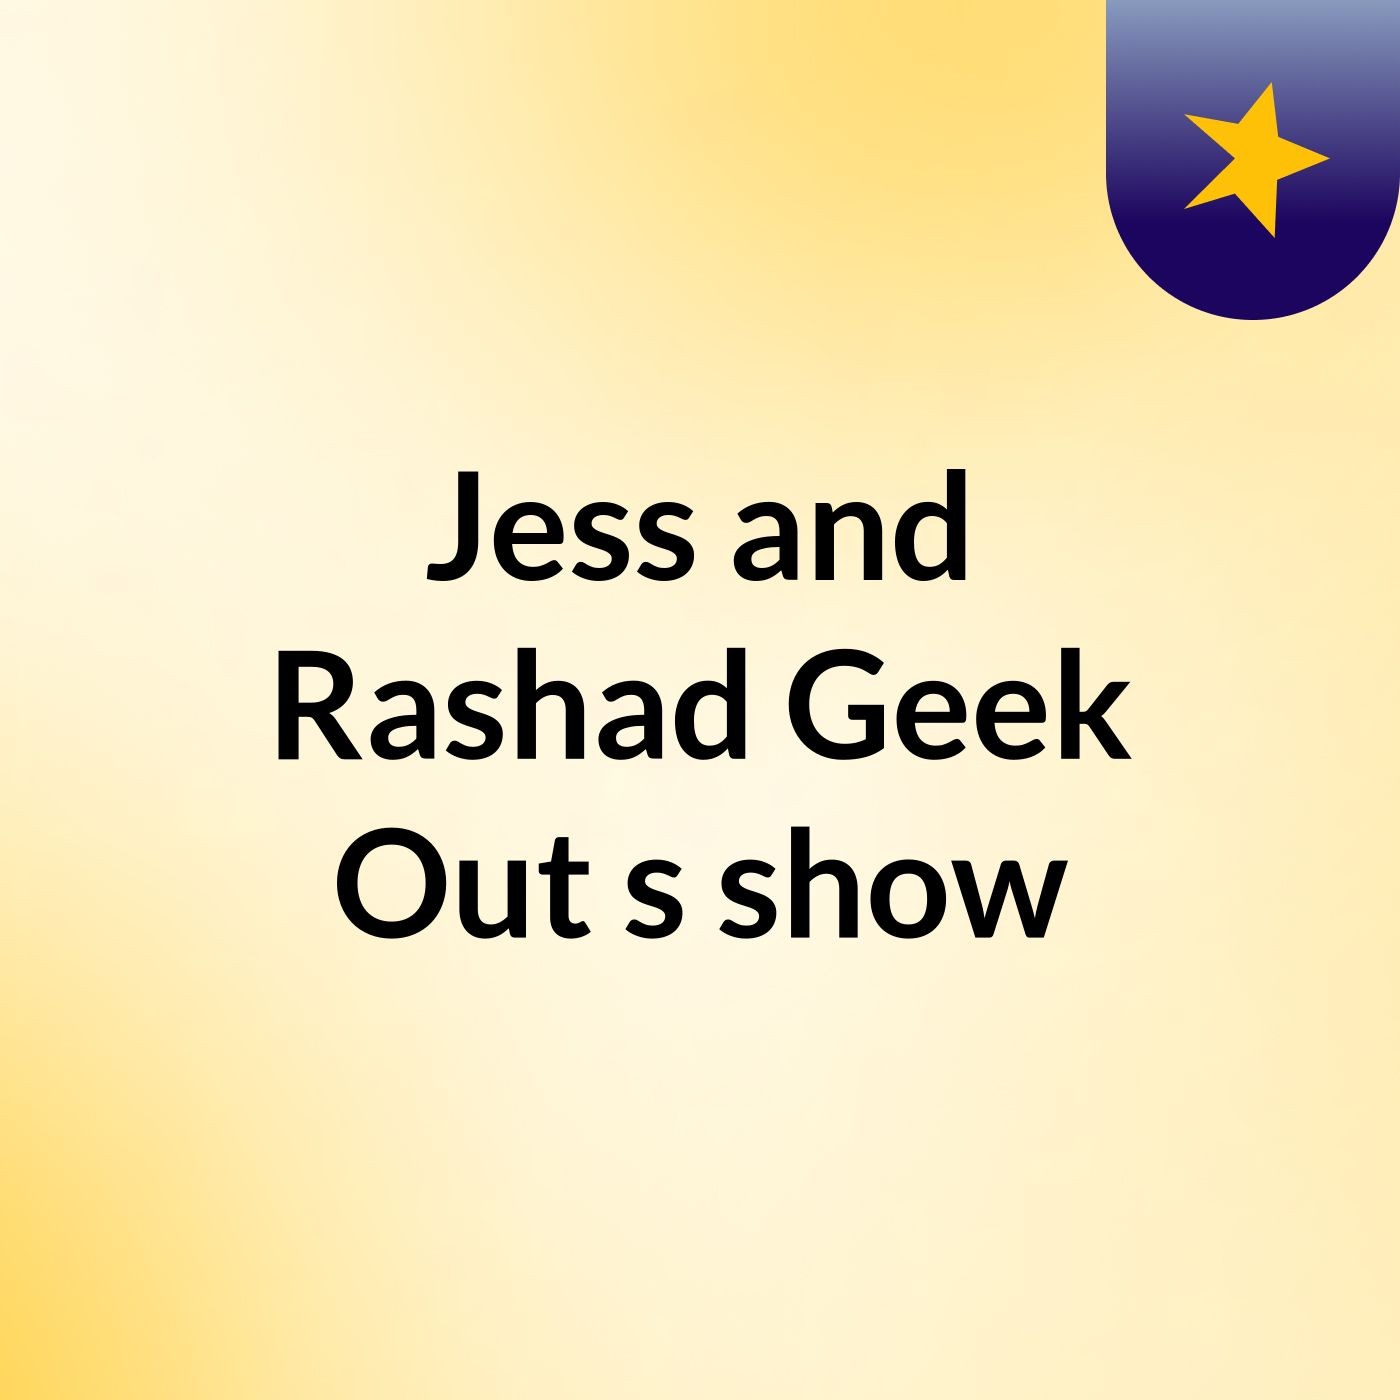 Jess and Rashad Geek Out's show